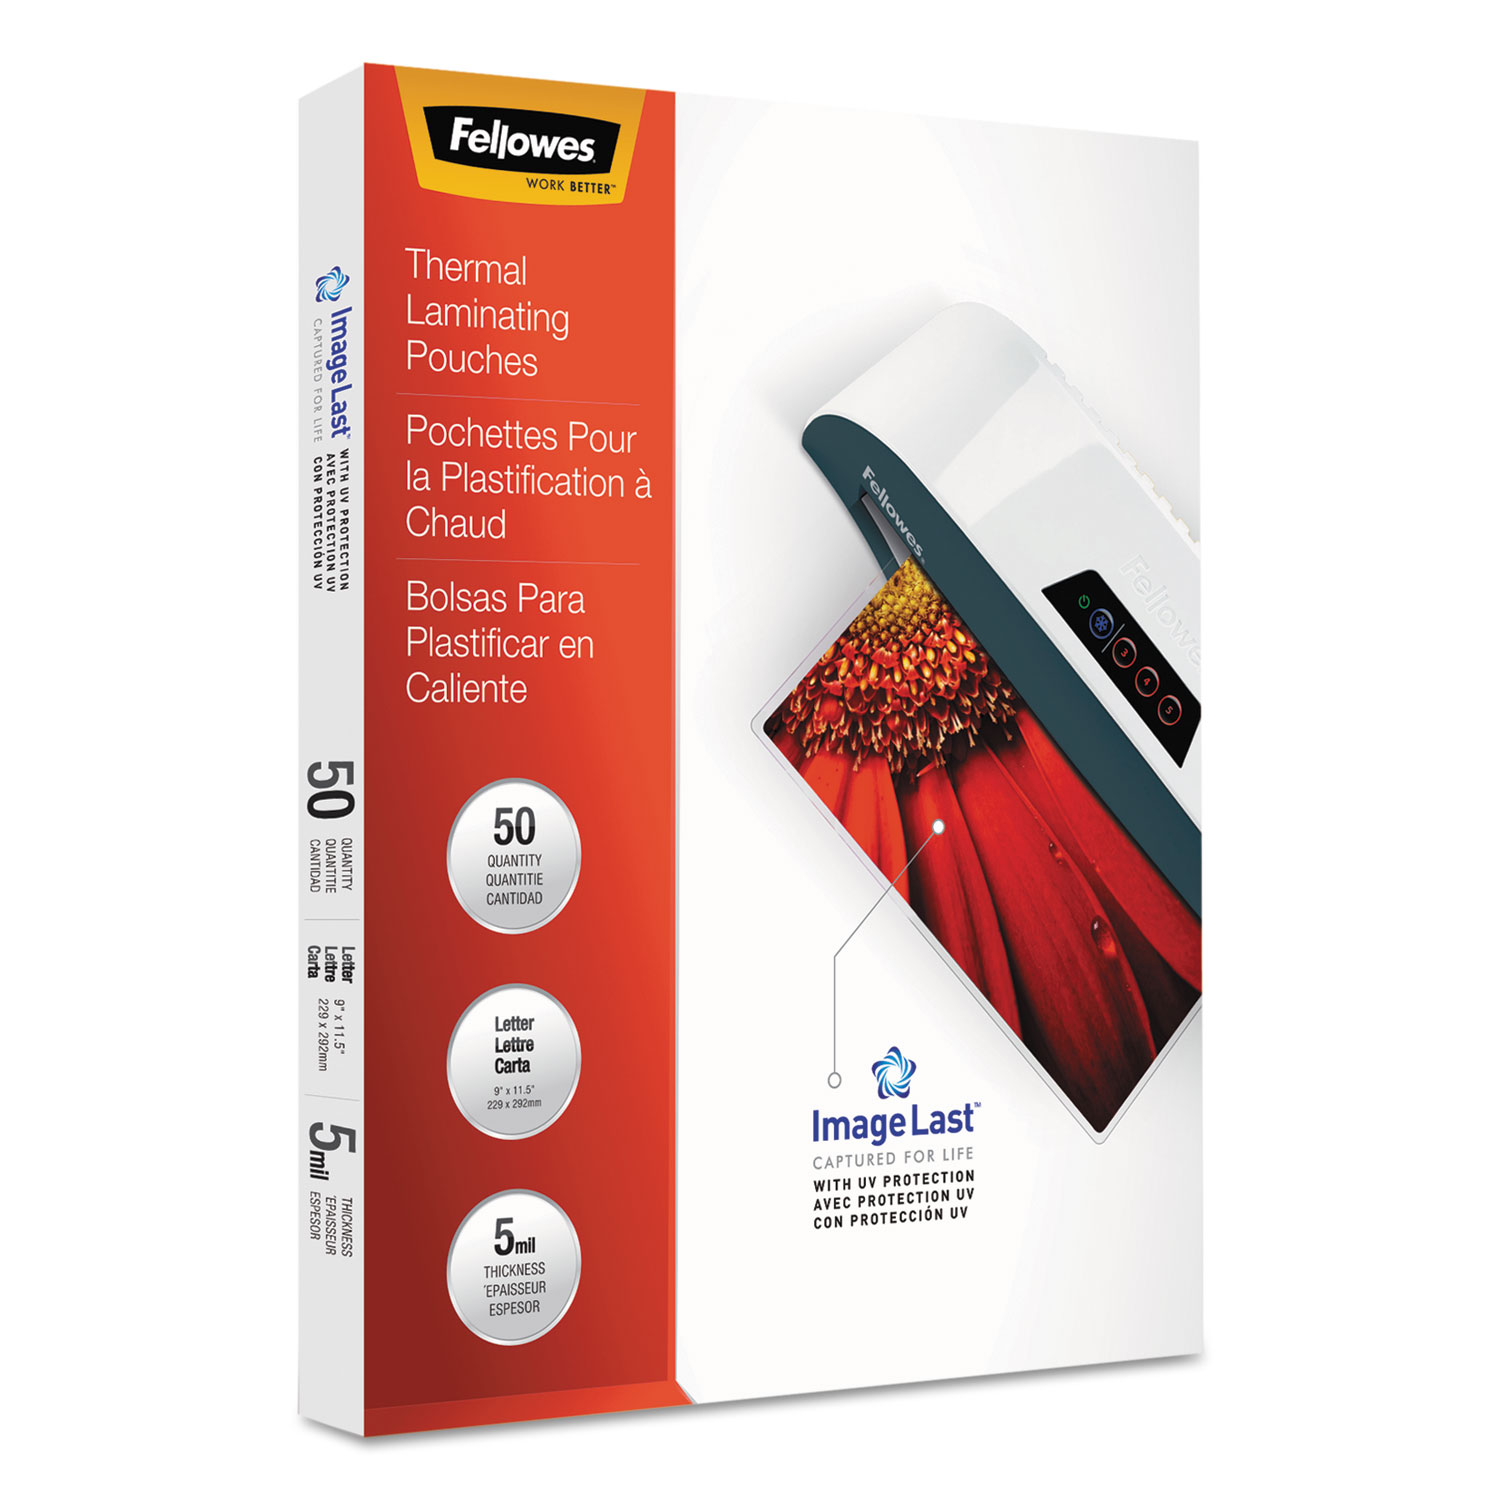  Fellowes 5204002 ImageLast Laminating Pouches with UV Protection, 5 mil, 9 x 11.5, Clear, 50/Pack (FEL5204002) 